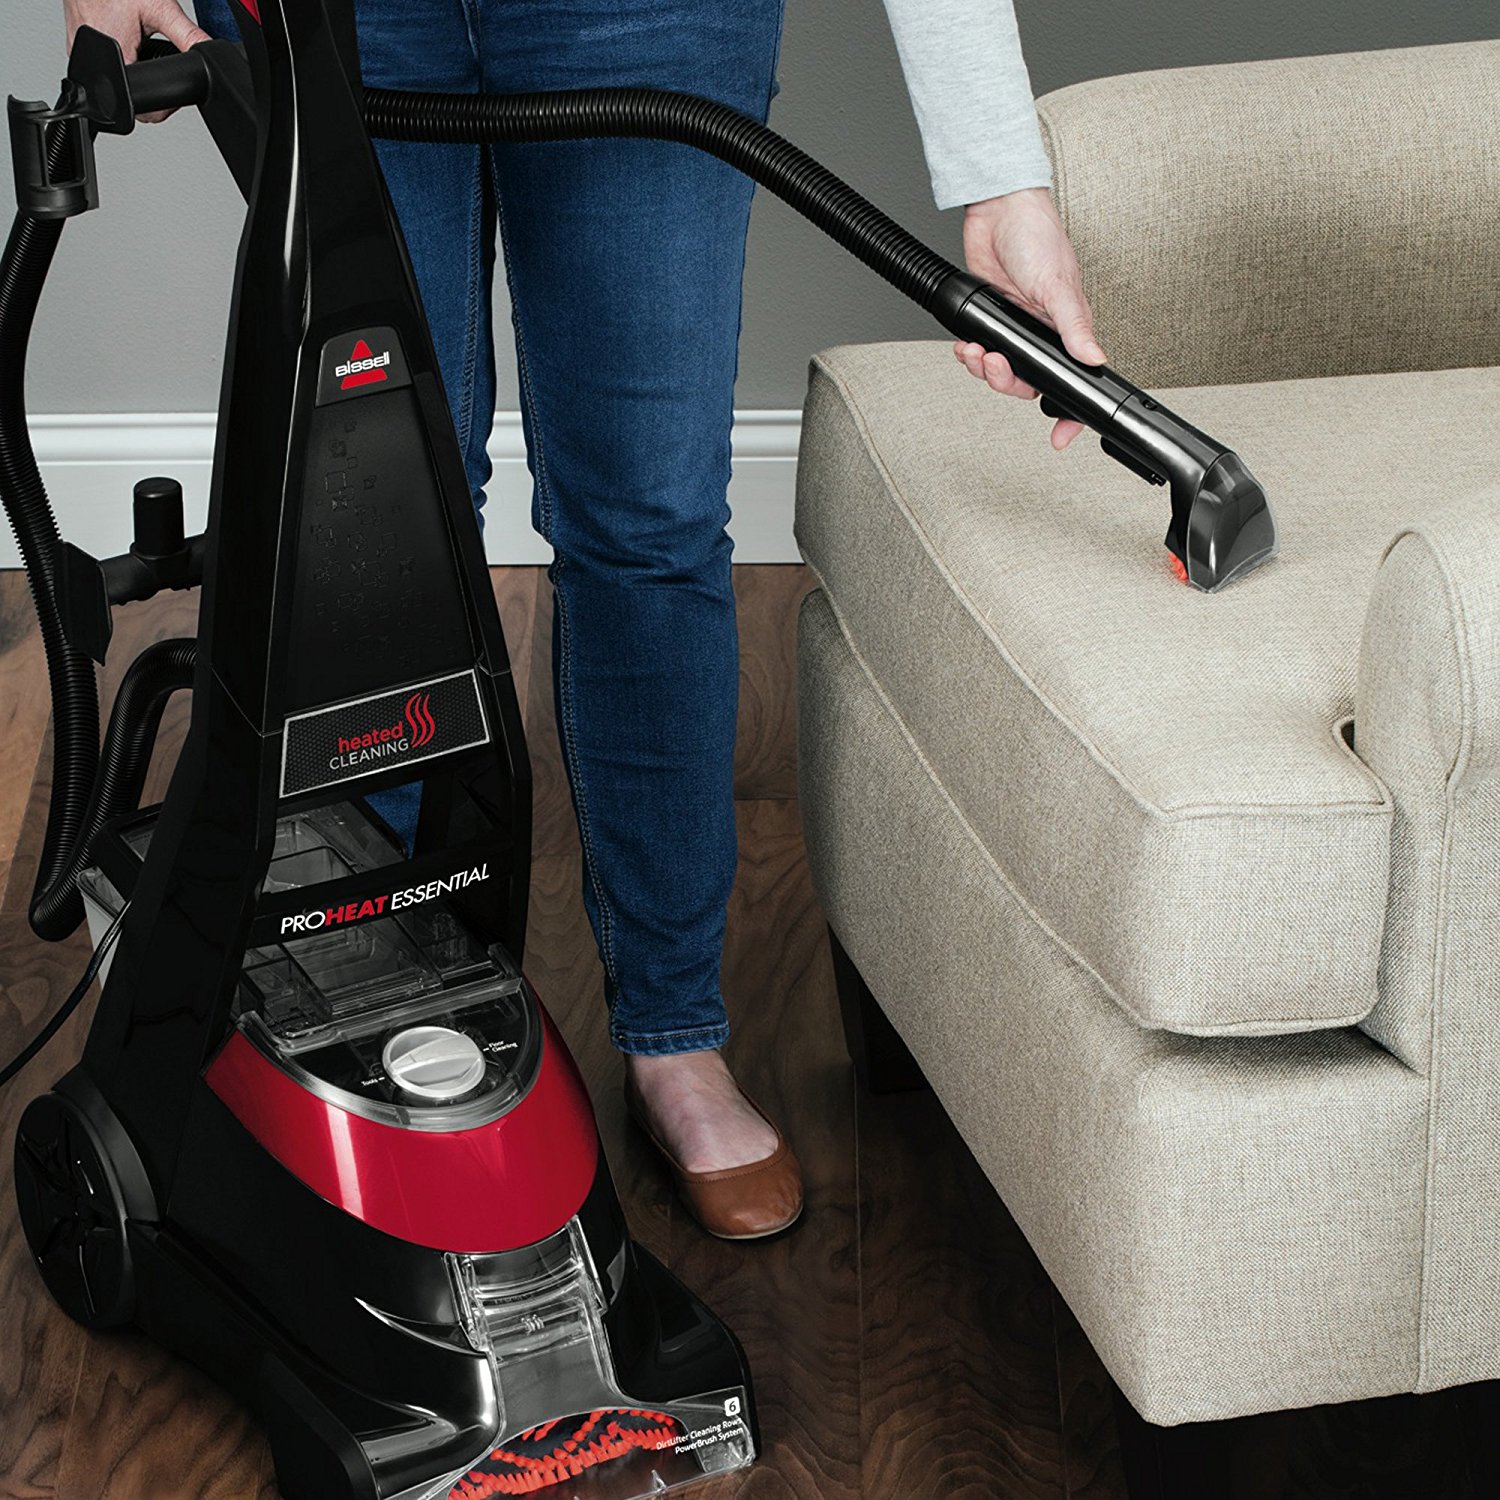 Bissell ProHeat essential carpet cleaner for $137